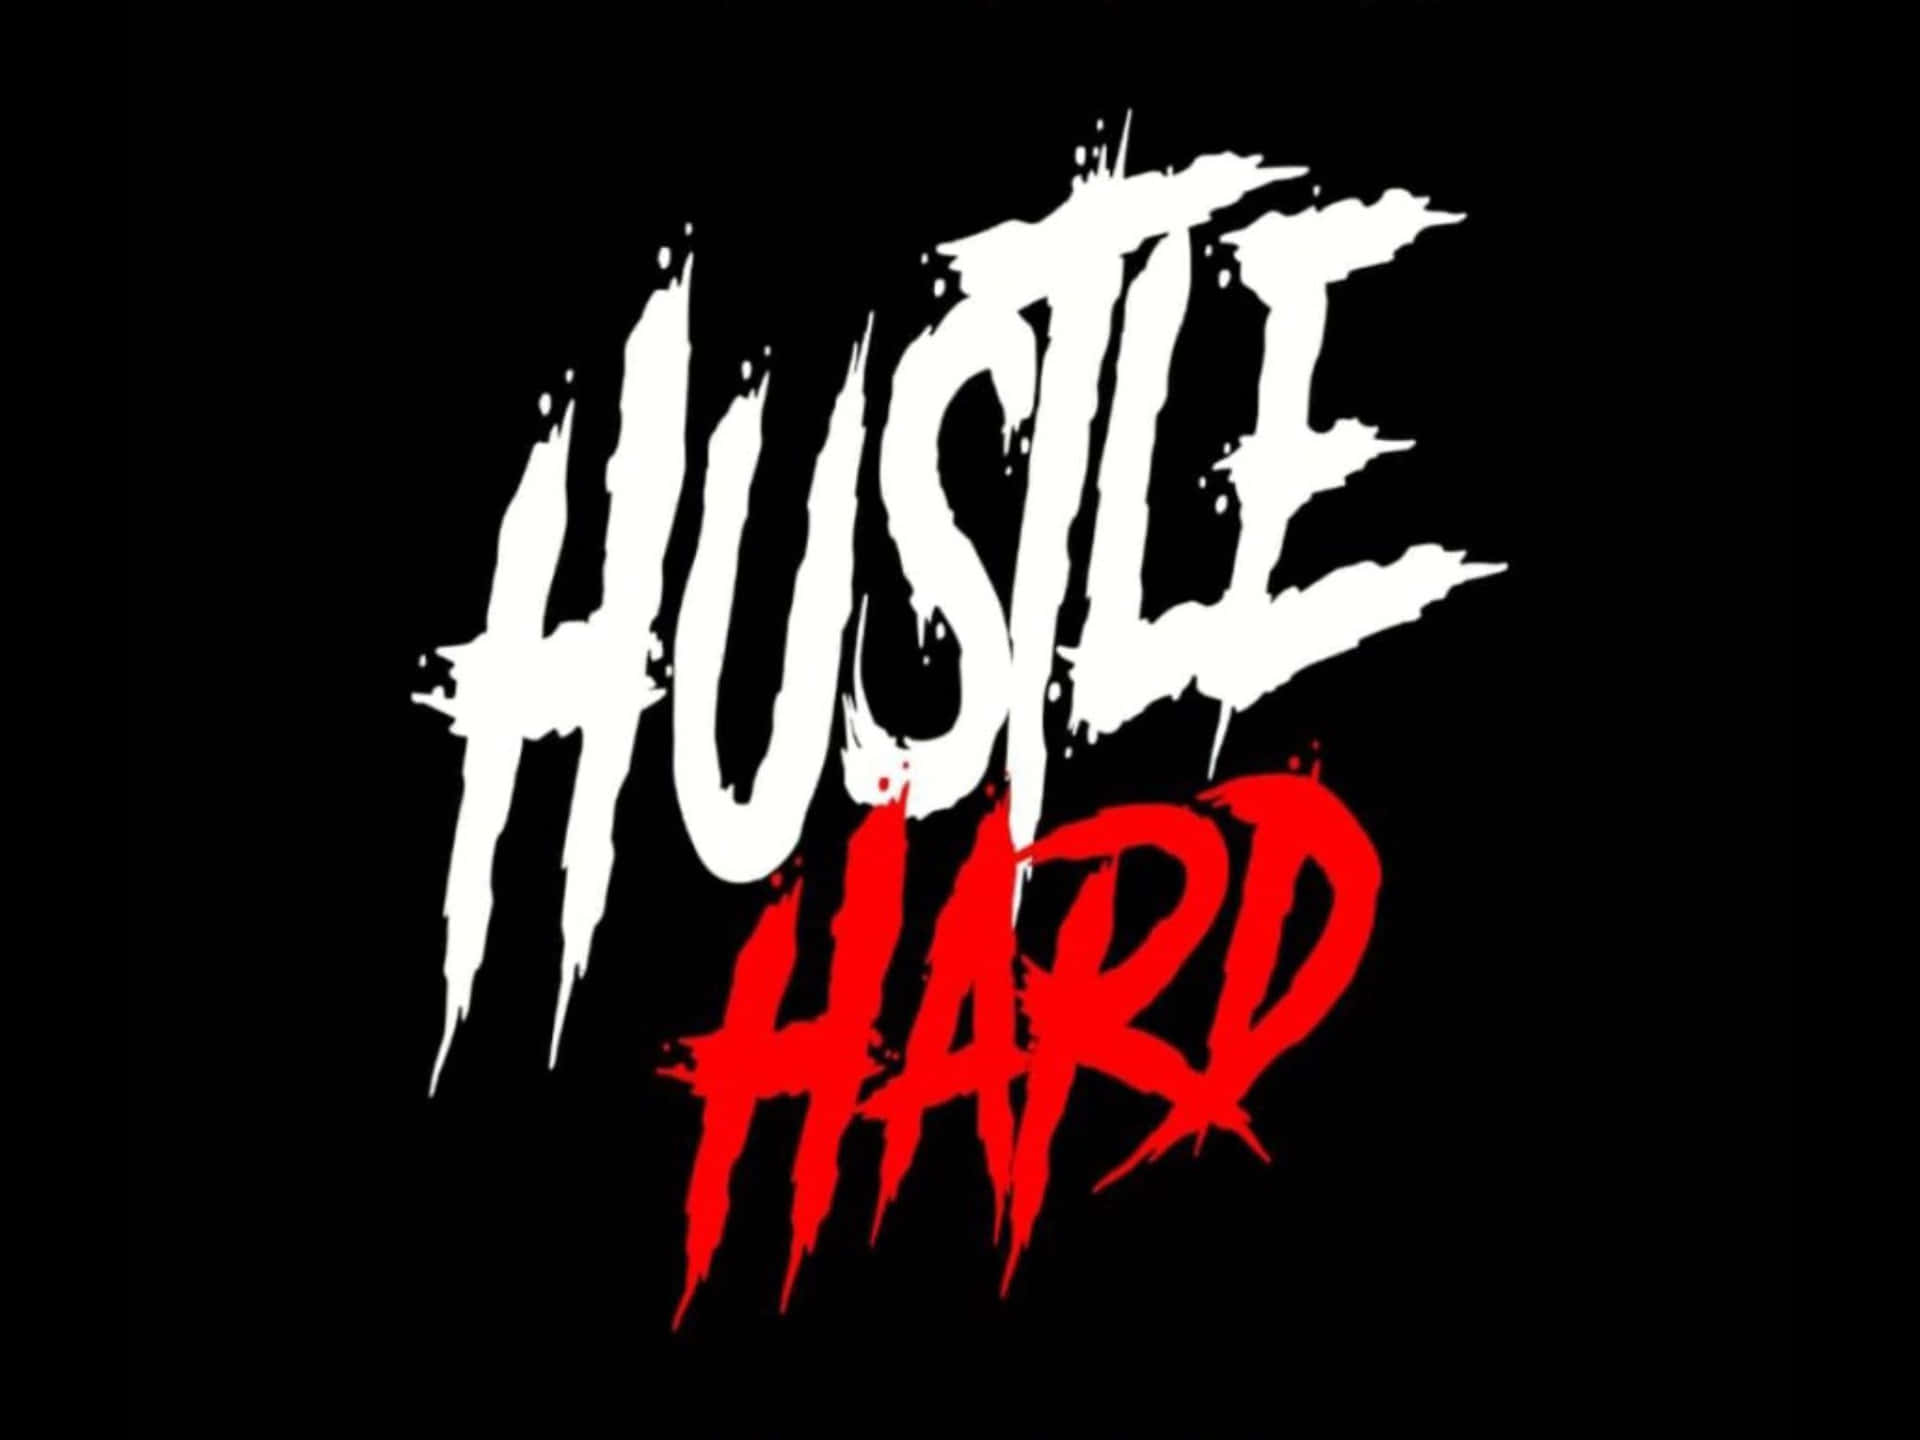 Get the Whole Picture at Hustler Wallpaper